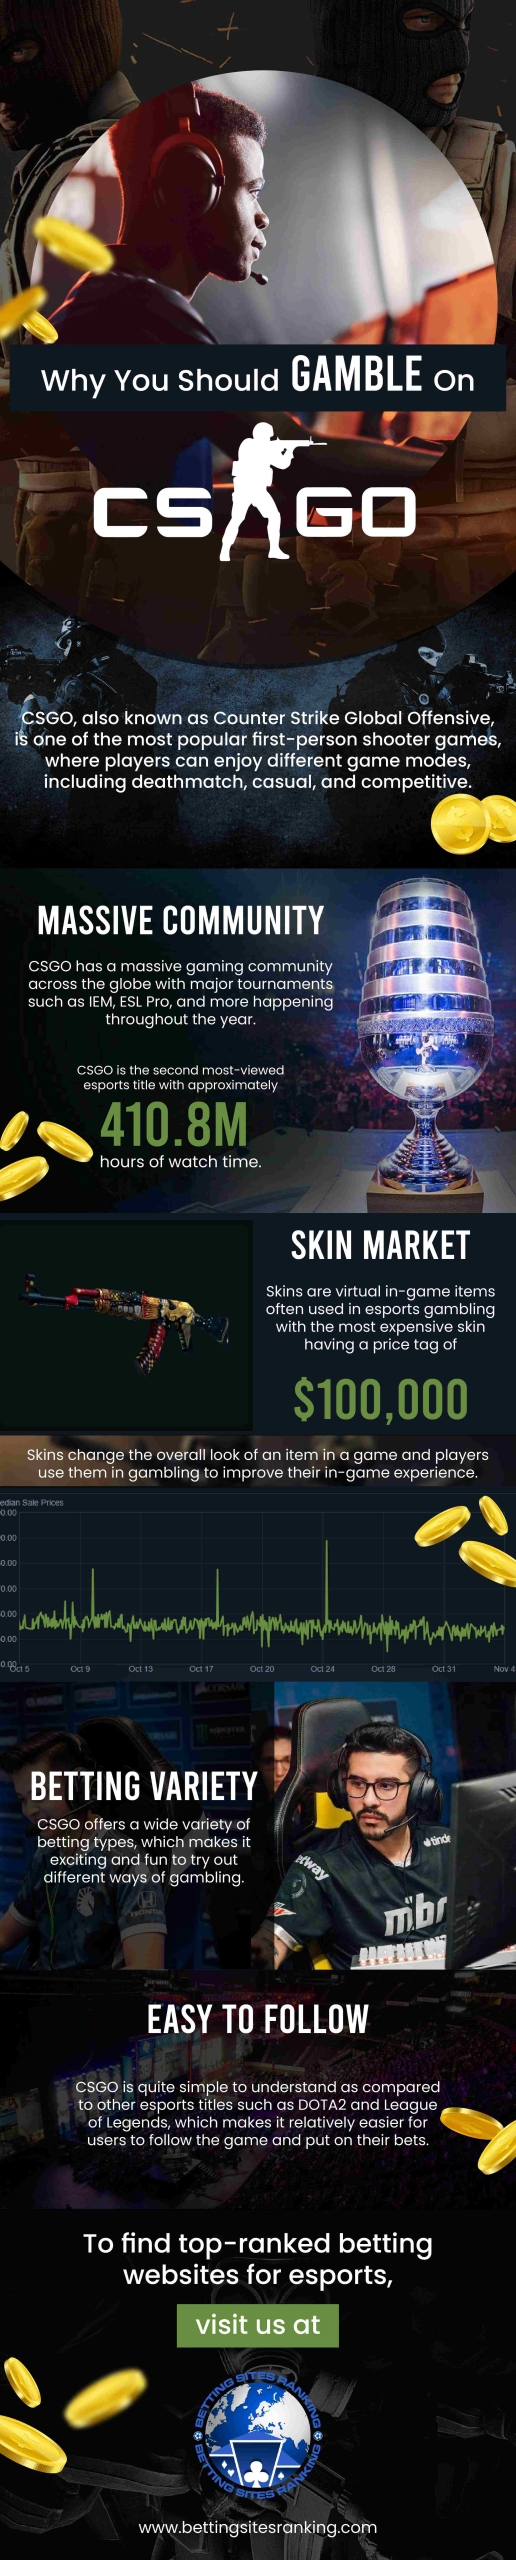 Why You Should GAMBLE ON CSGO